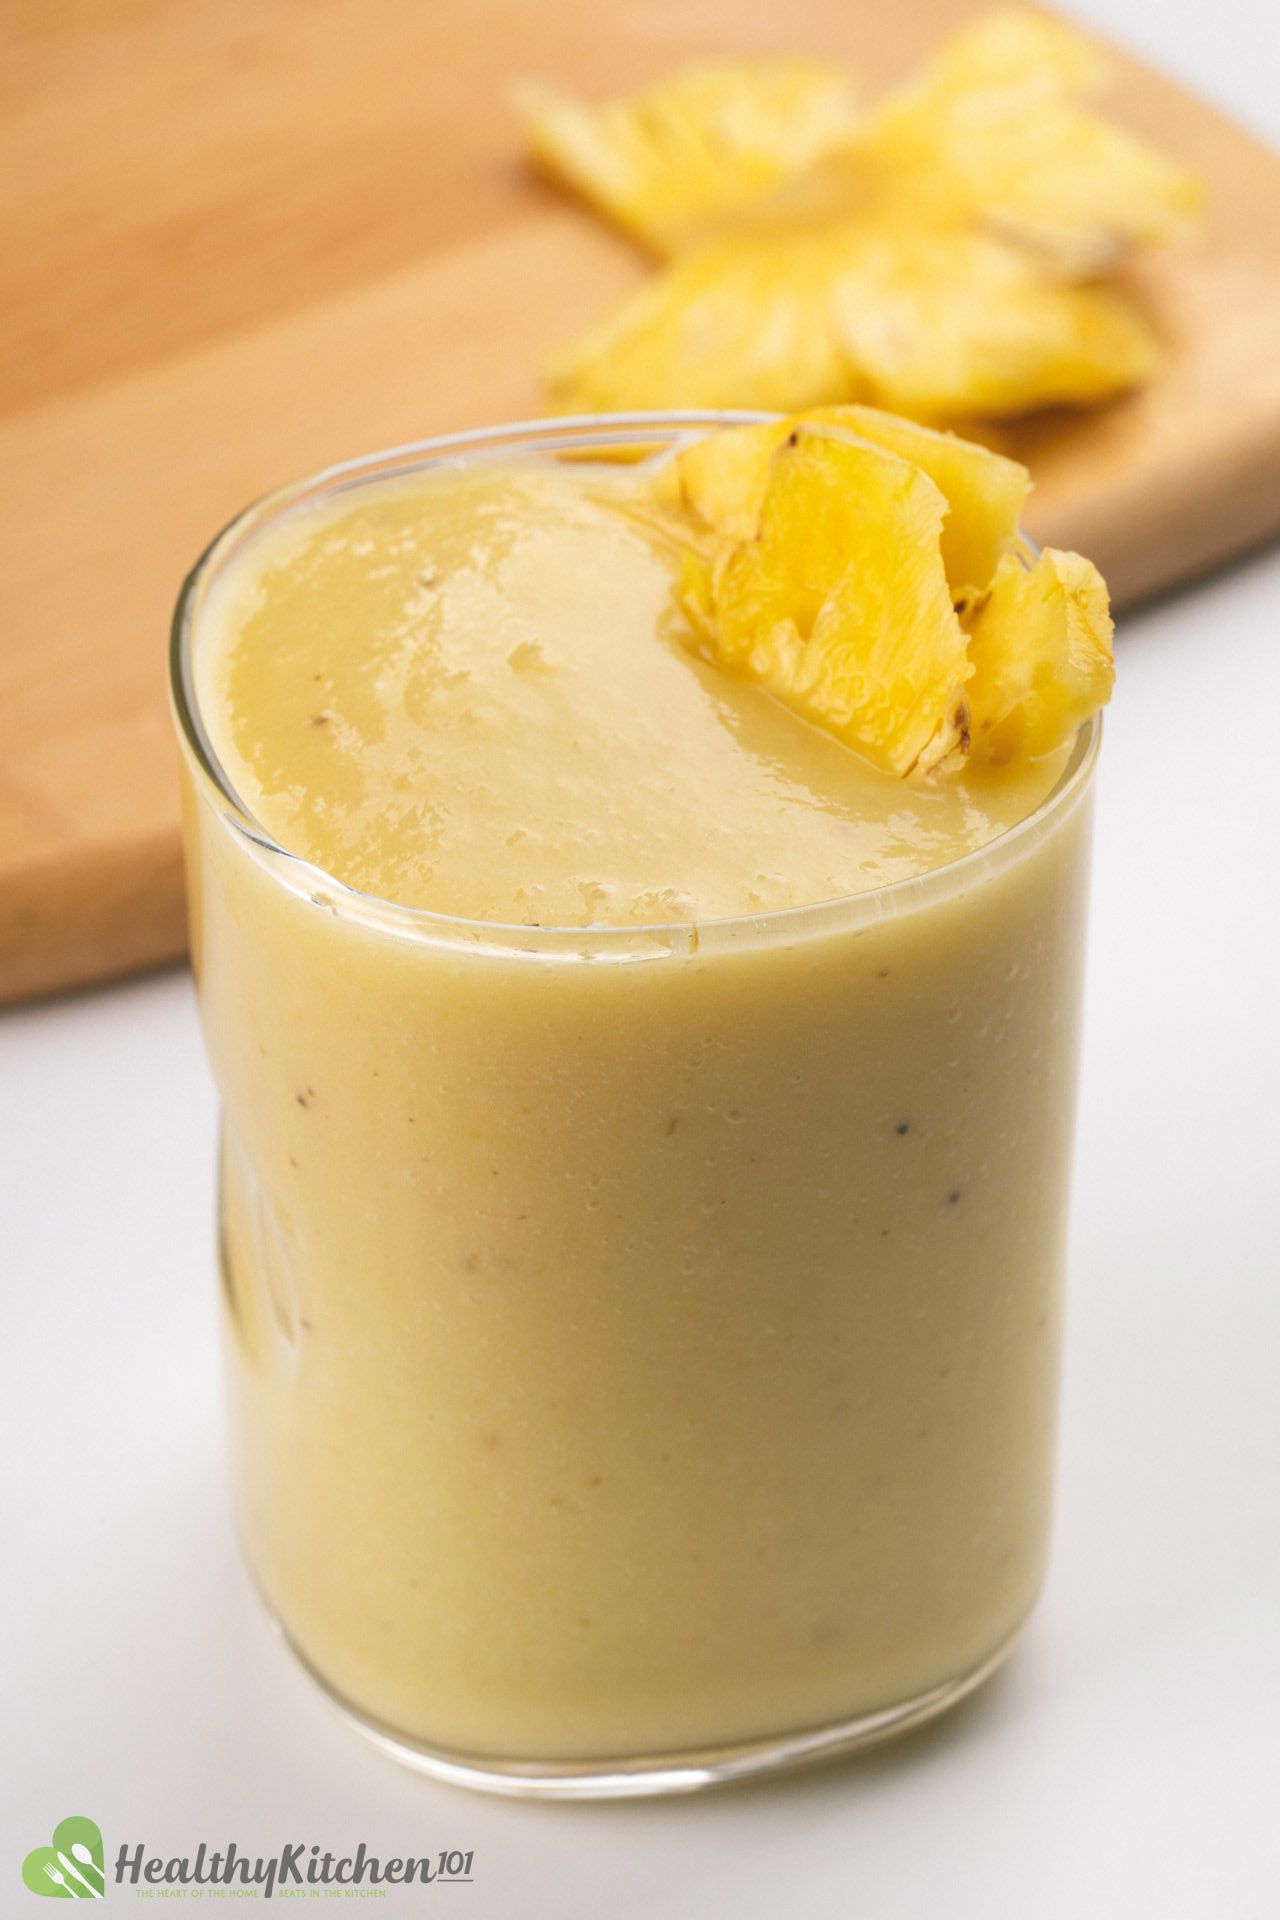 What Fruit Goes With Pineapple in a Smoothie